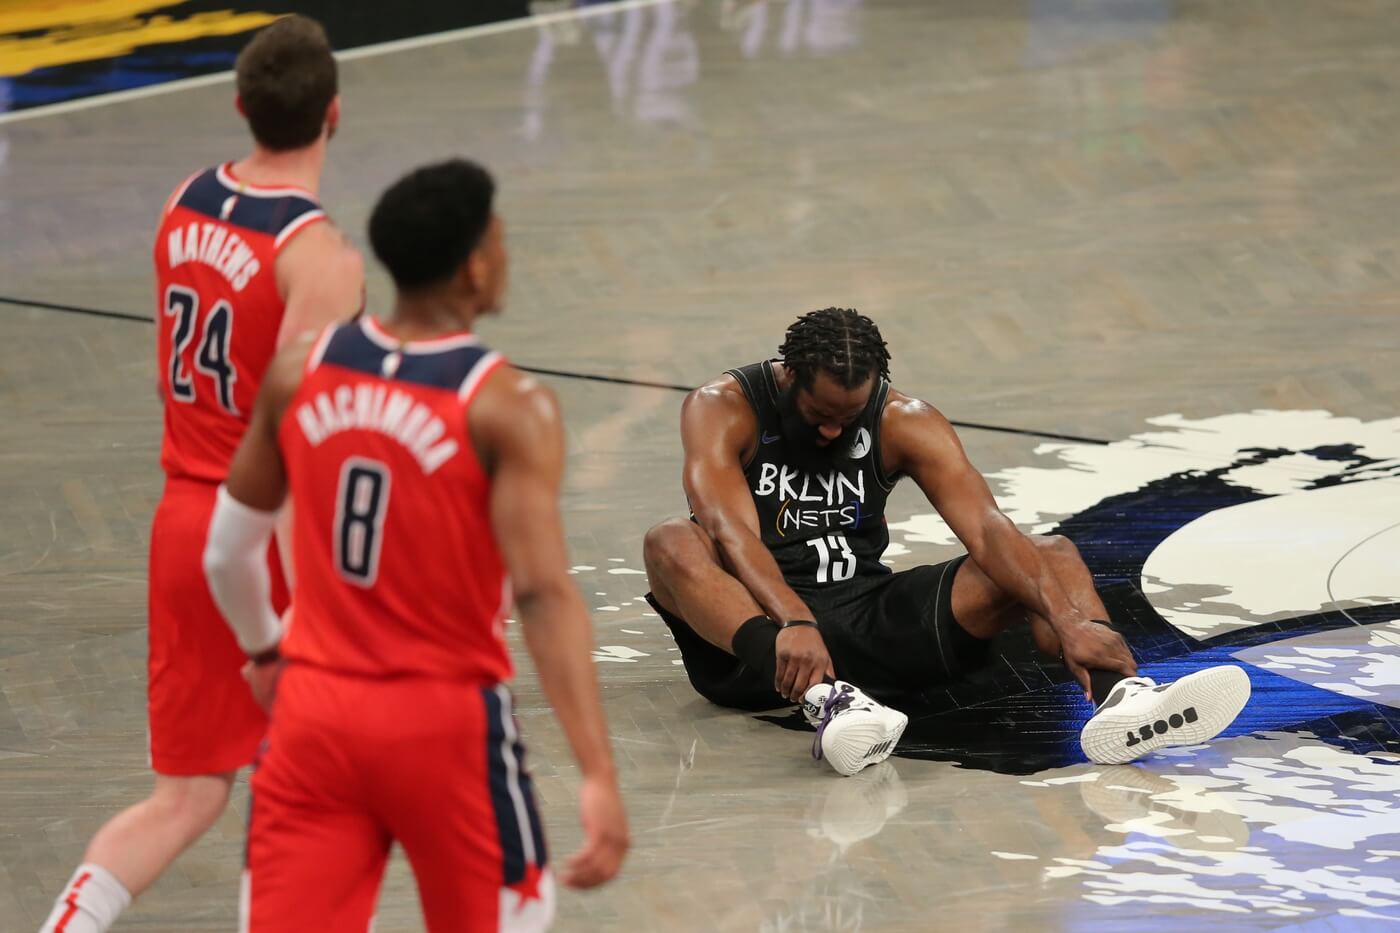 Mar 21, 2021; Brooklyn, New York, USA; Brooklyn Nets shooting guard James Harden (13) sits on the court after an injury at the end of the second quarter against the Washington Wizards at Barclays Center. Mandatory Credit: Brad Penner-USA TODAY Sports